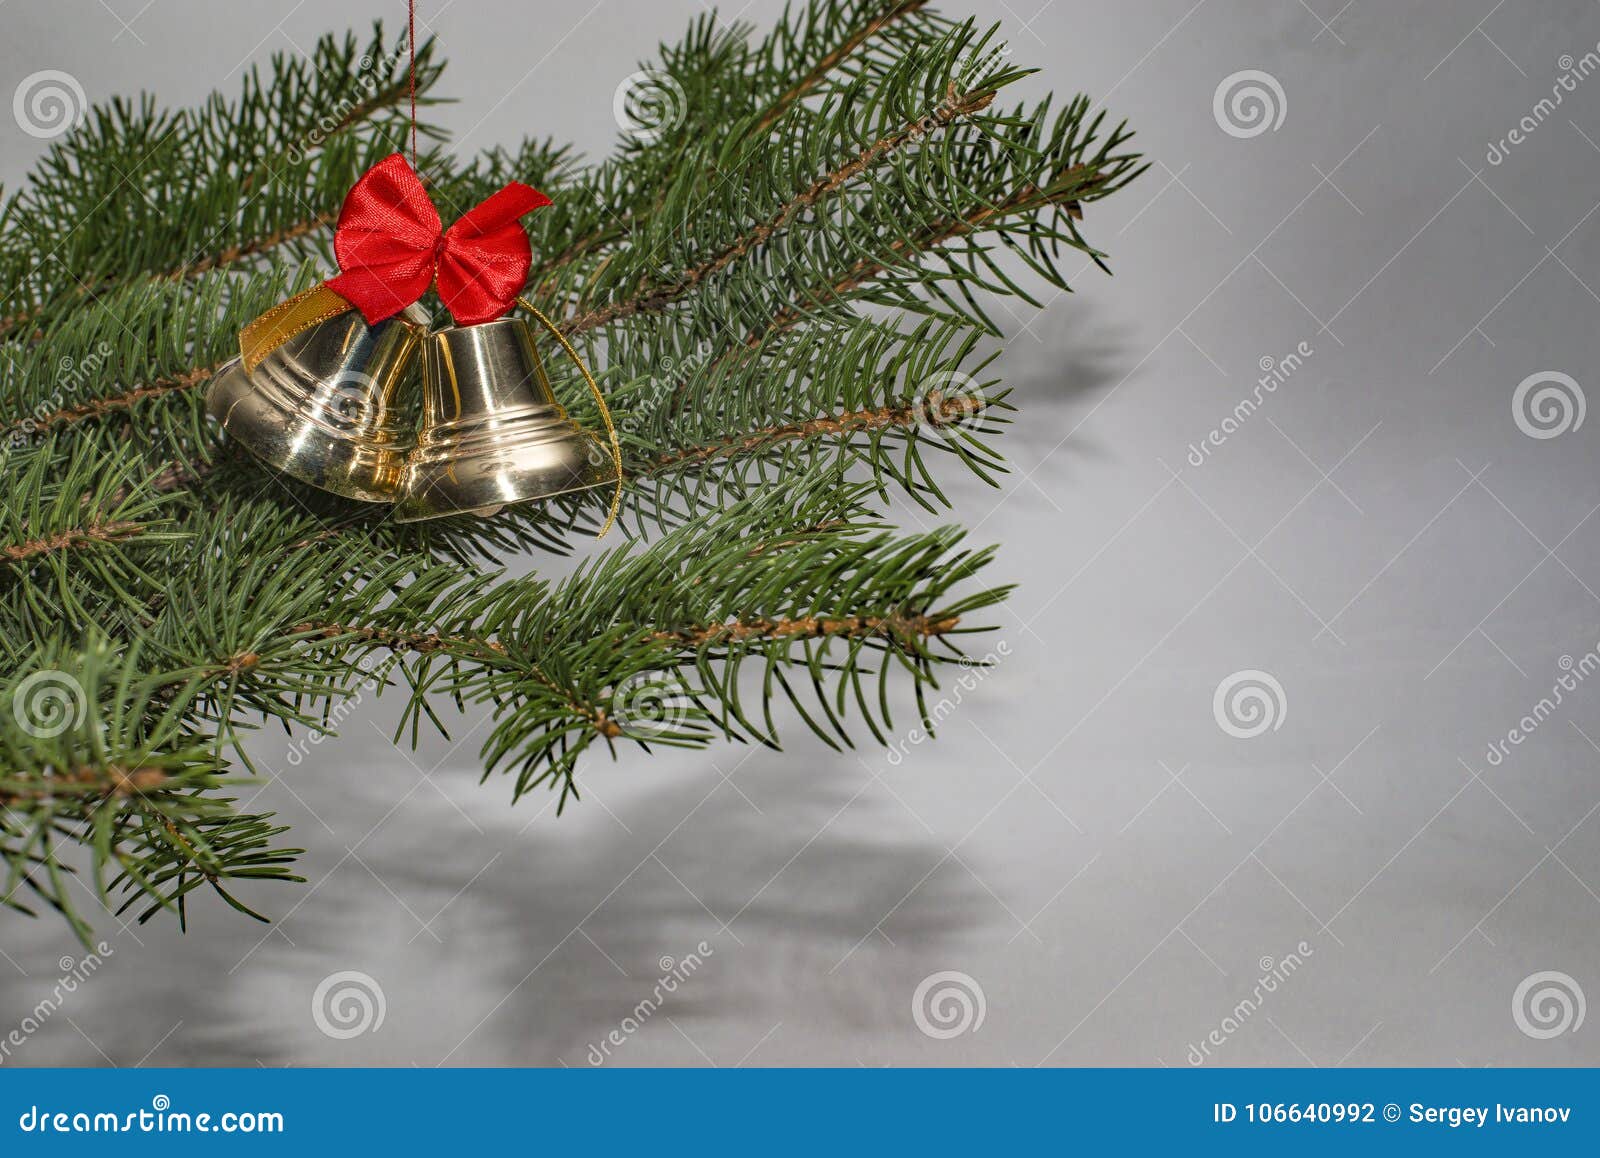 Jingle Bells with Red Bow and Christmas Tree. Stock Photo - Image of ...